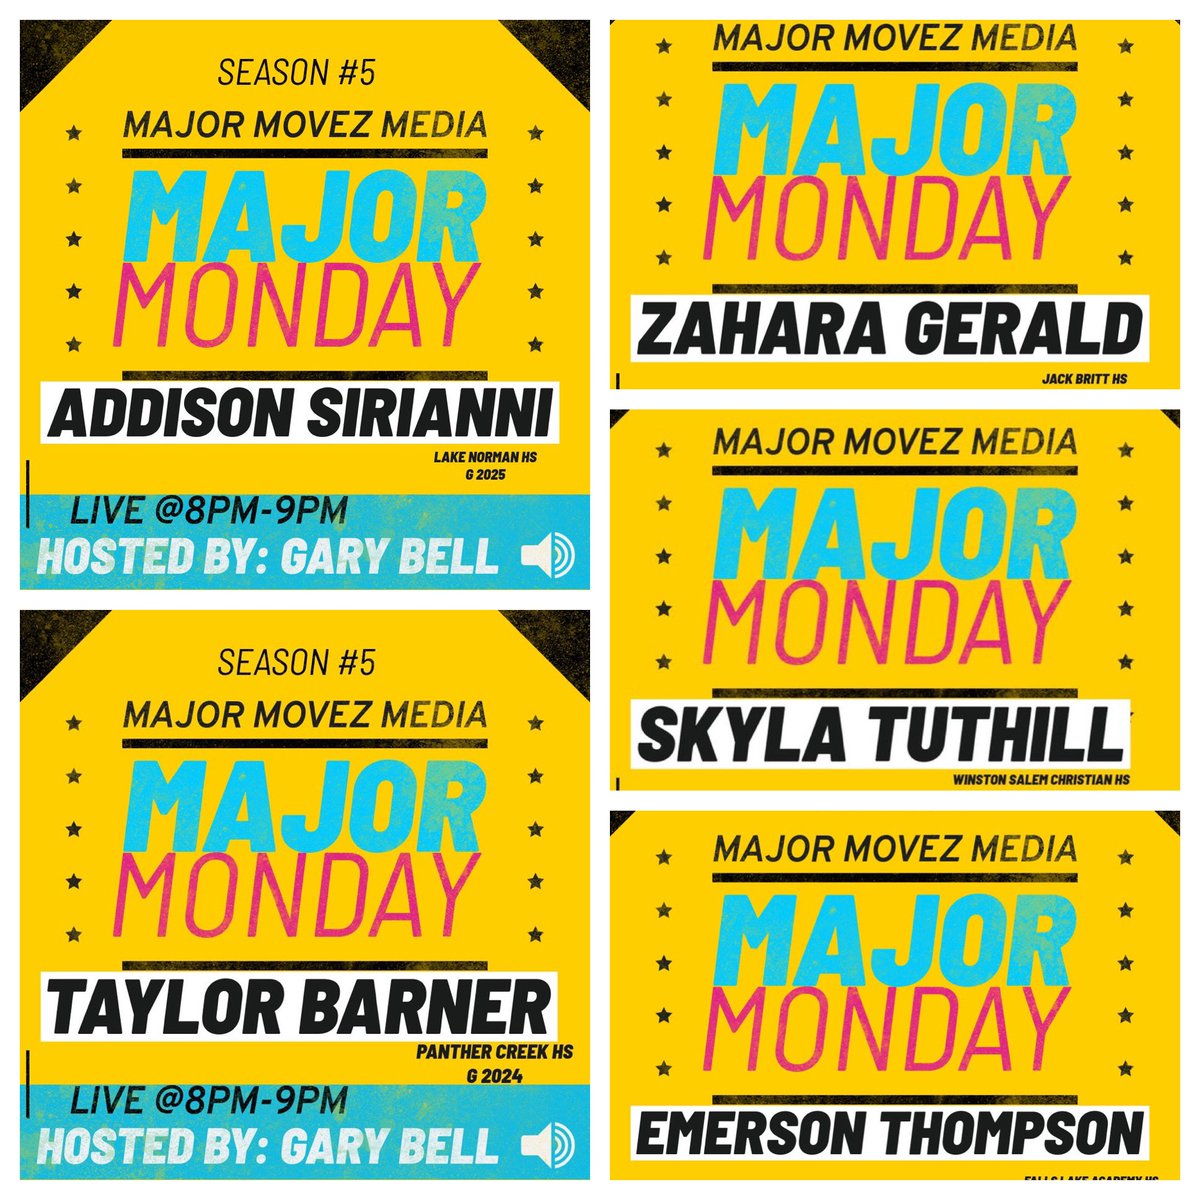 Excited to be invited back to talk w/ @MMBR_CoachGBell tomorrow on #MajorMonday at 8:00!

Awesome lineup of players👀
@Skylatuthill
@Taylor_barner24
@emersonfaith9
@ZaharaGerald

@LNHSGBB @FOPBasketball @LADYATTACKELITE @MajorMovezMedia @CoachGarrisjr @coachmareion @Gm4Sports